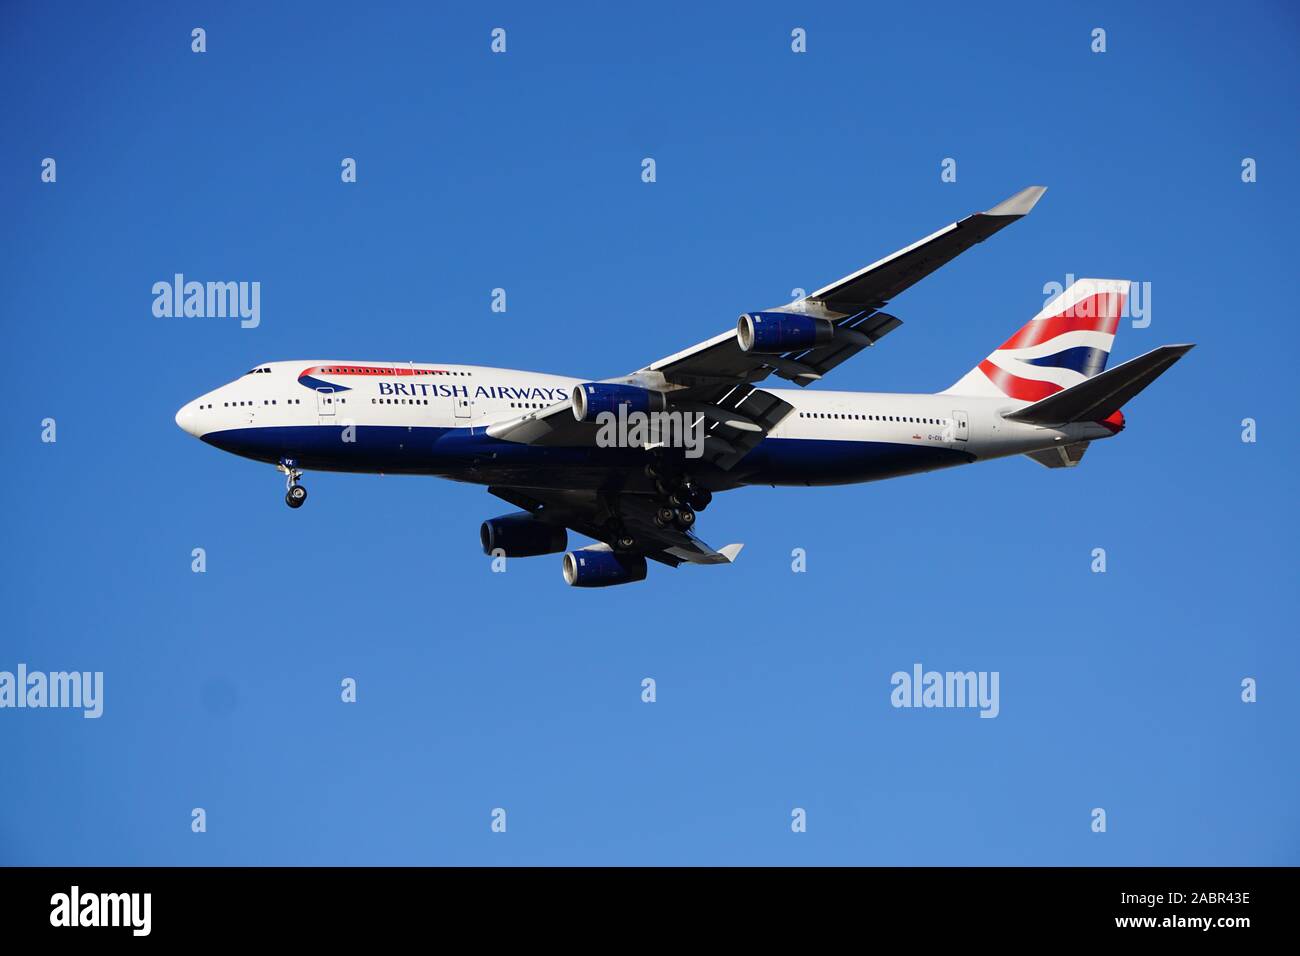 British Airways Boeing 747 Queen of the Skies on approach to Chicago's O'Hare International Airport after its flight from London Heathrow. Stock Photo